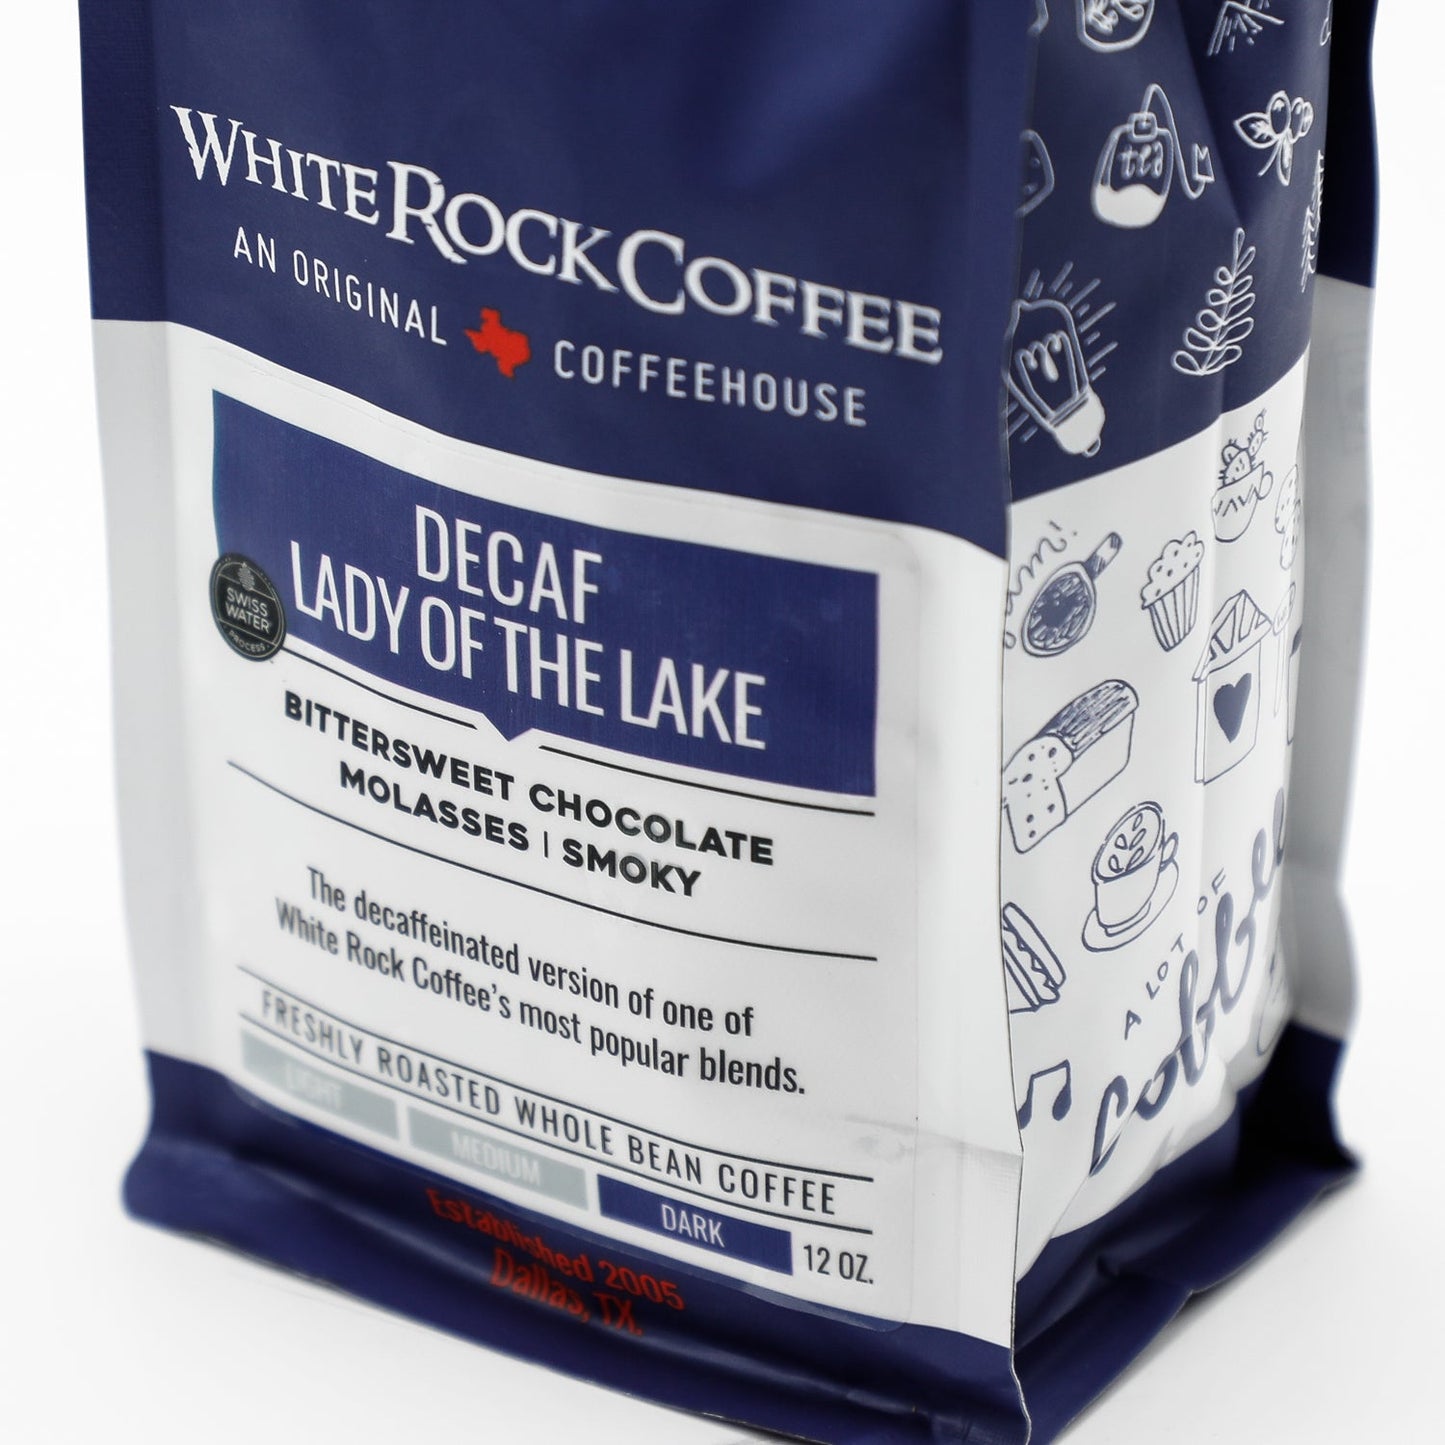 Decaf Lady of the Lake - White Rock Coffee